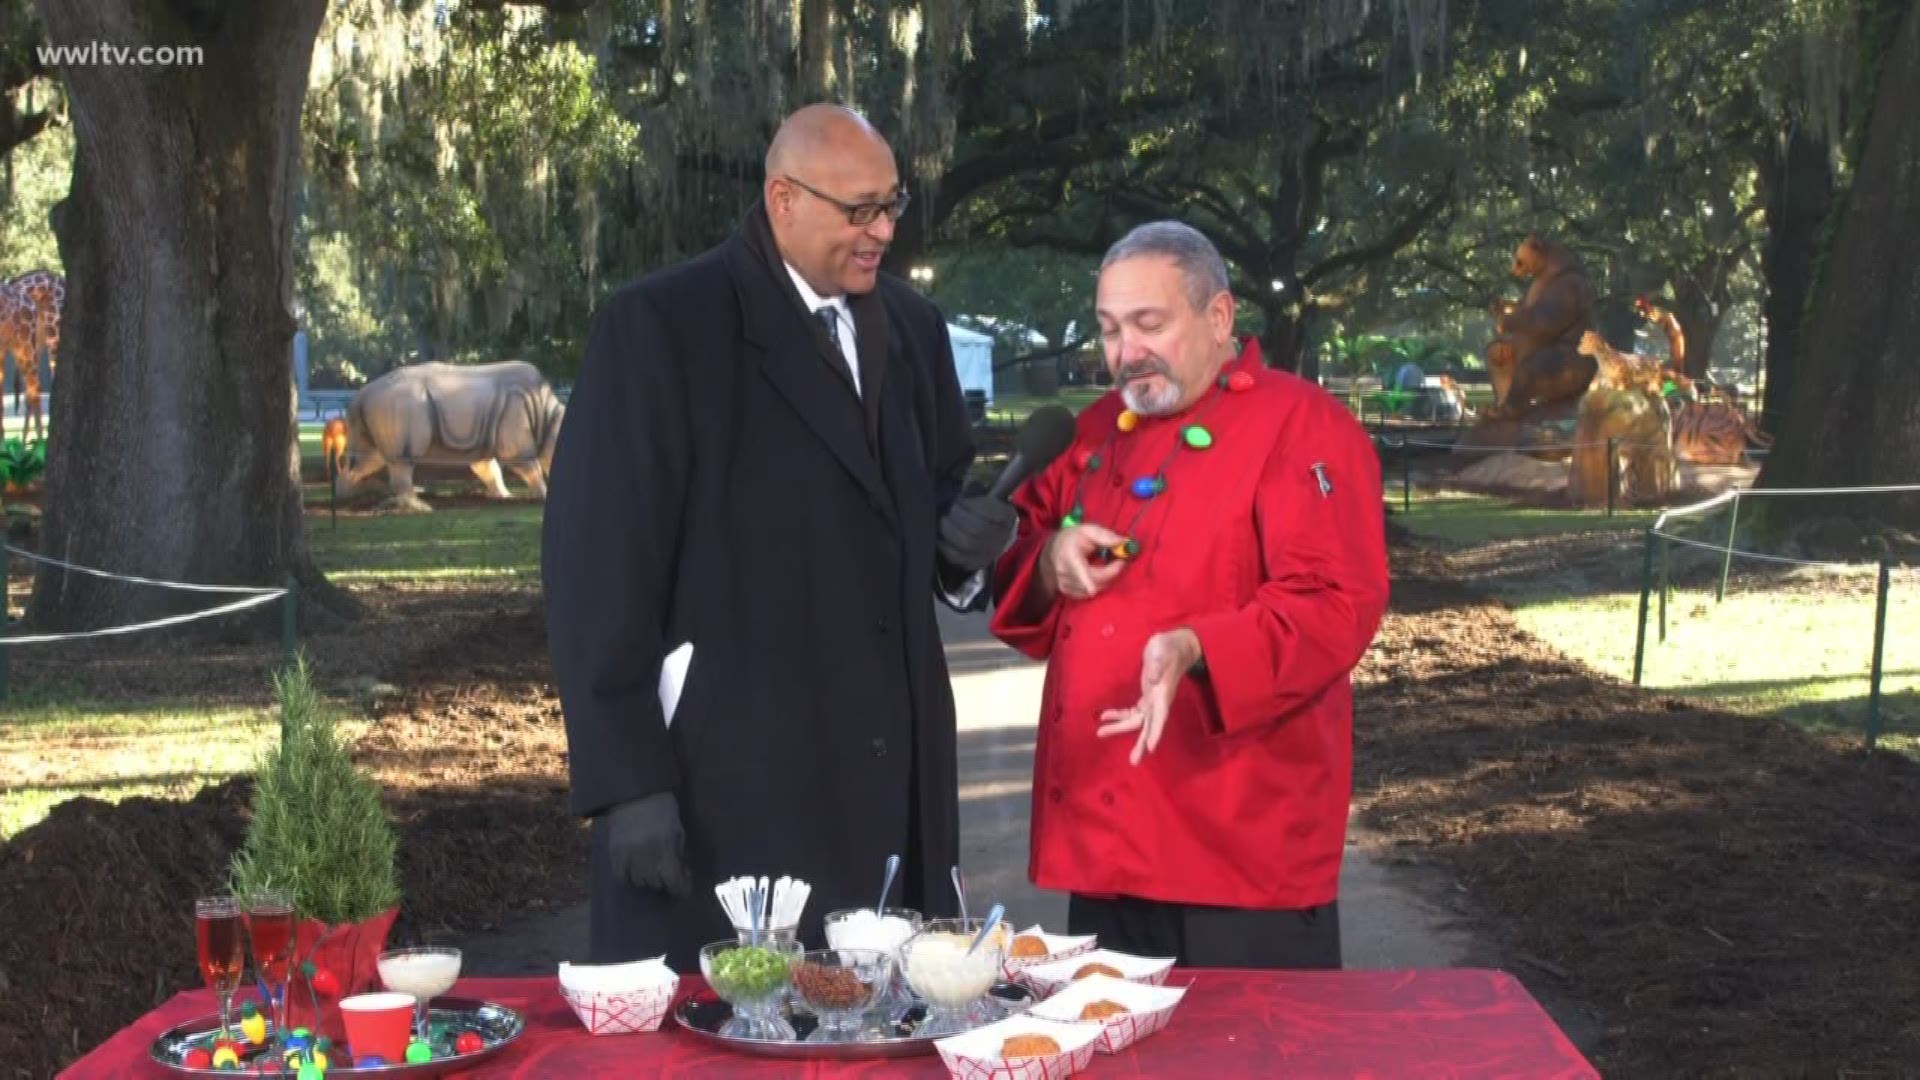 Chef Kevin Belton welcomes Chef Allen Ehrich of Audubon Catering & Events which is providing food at Audubon Zoo Lights.
EXEC. DIRECTOR, AUDUBON CATERING & EVENTS